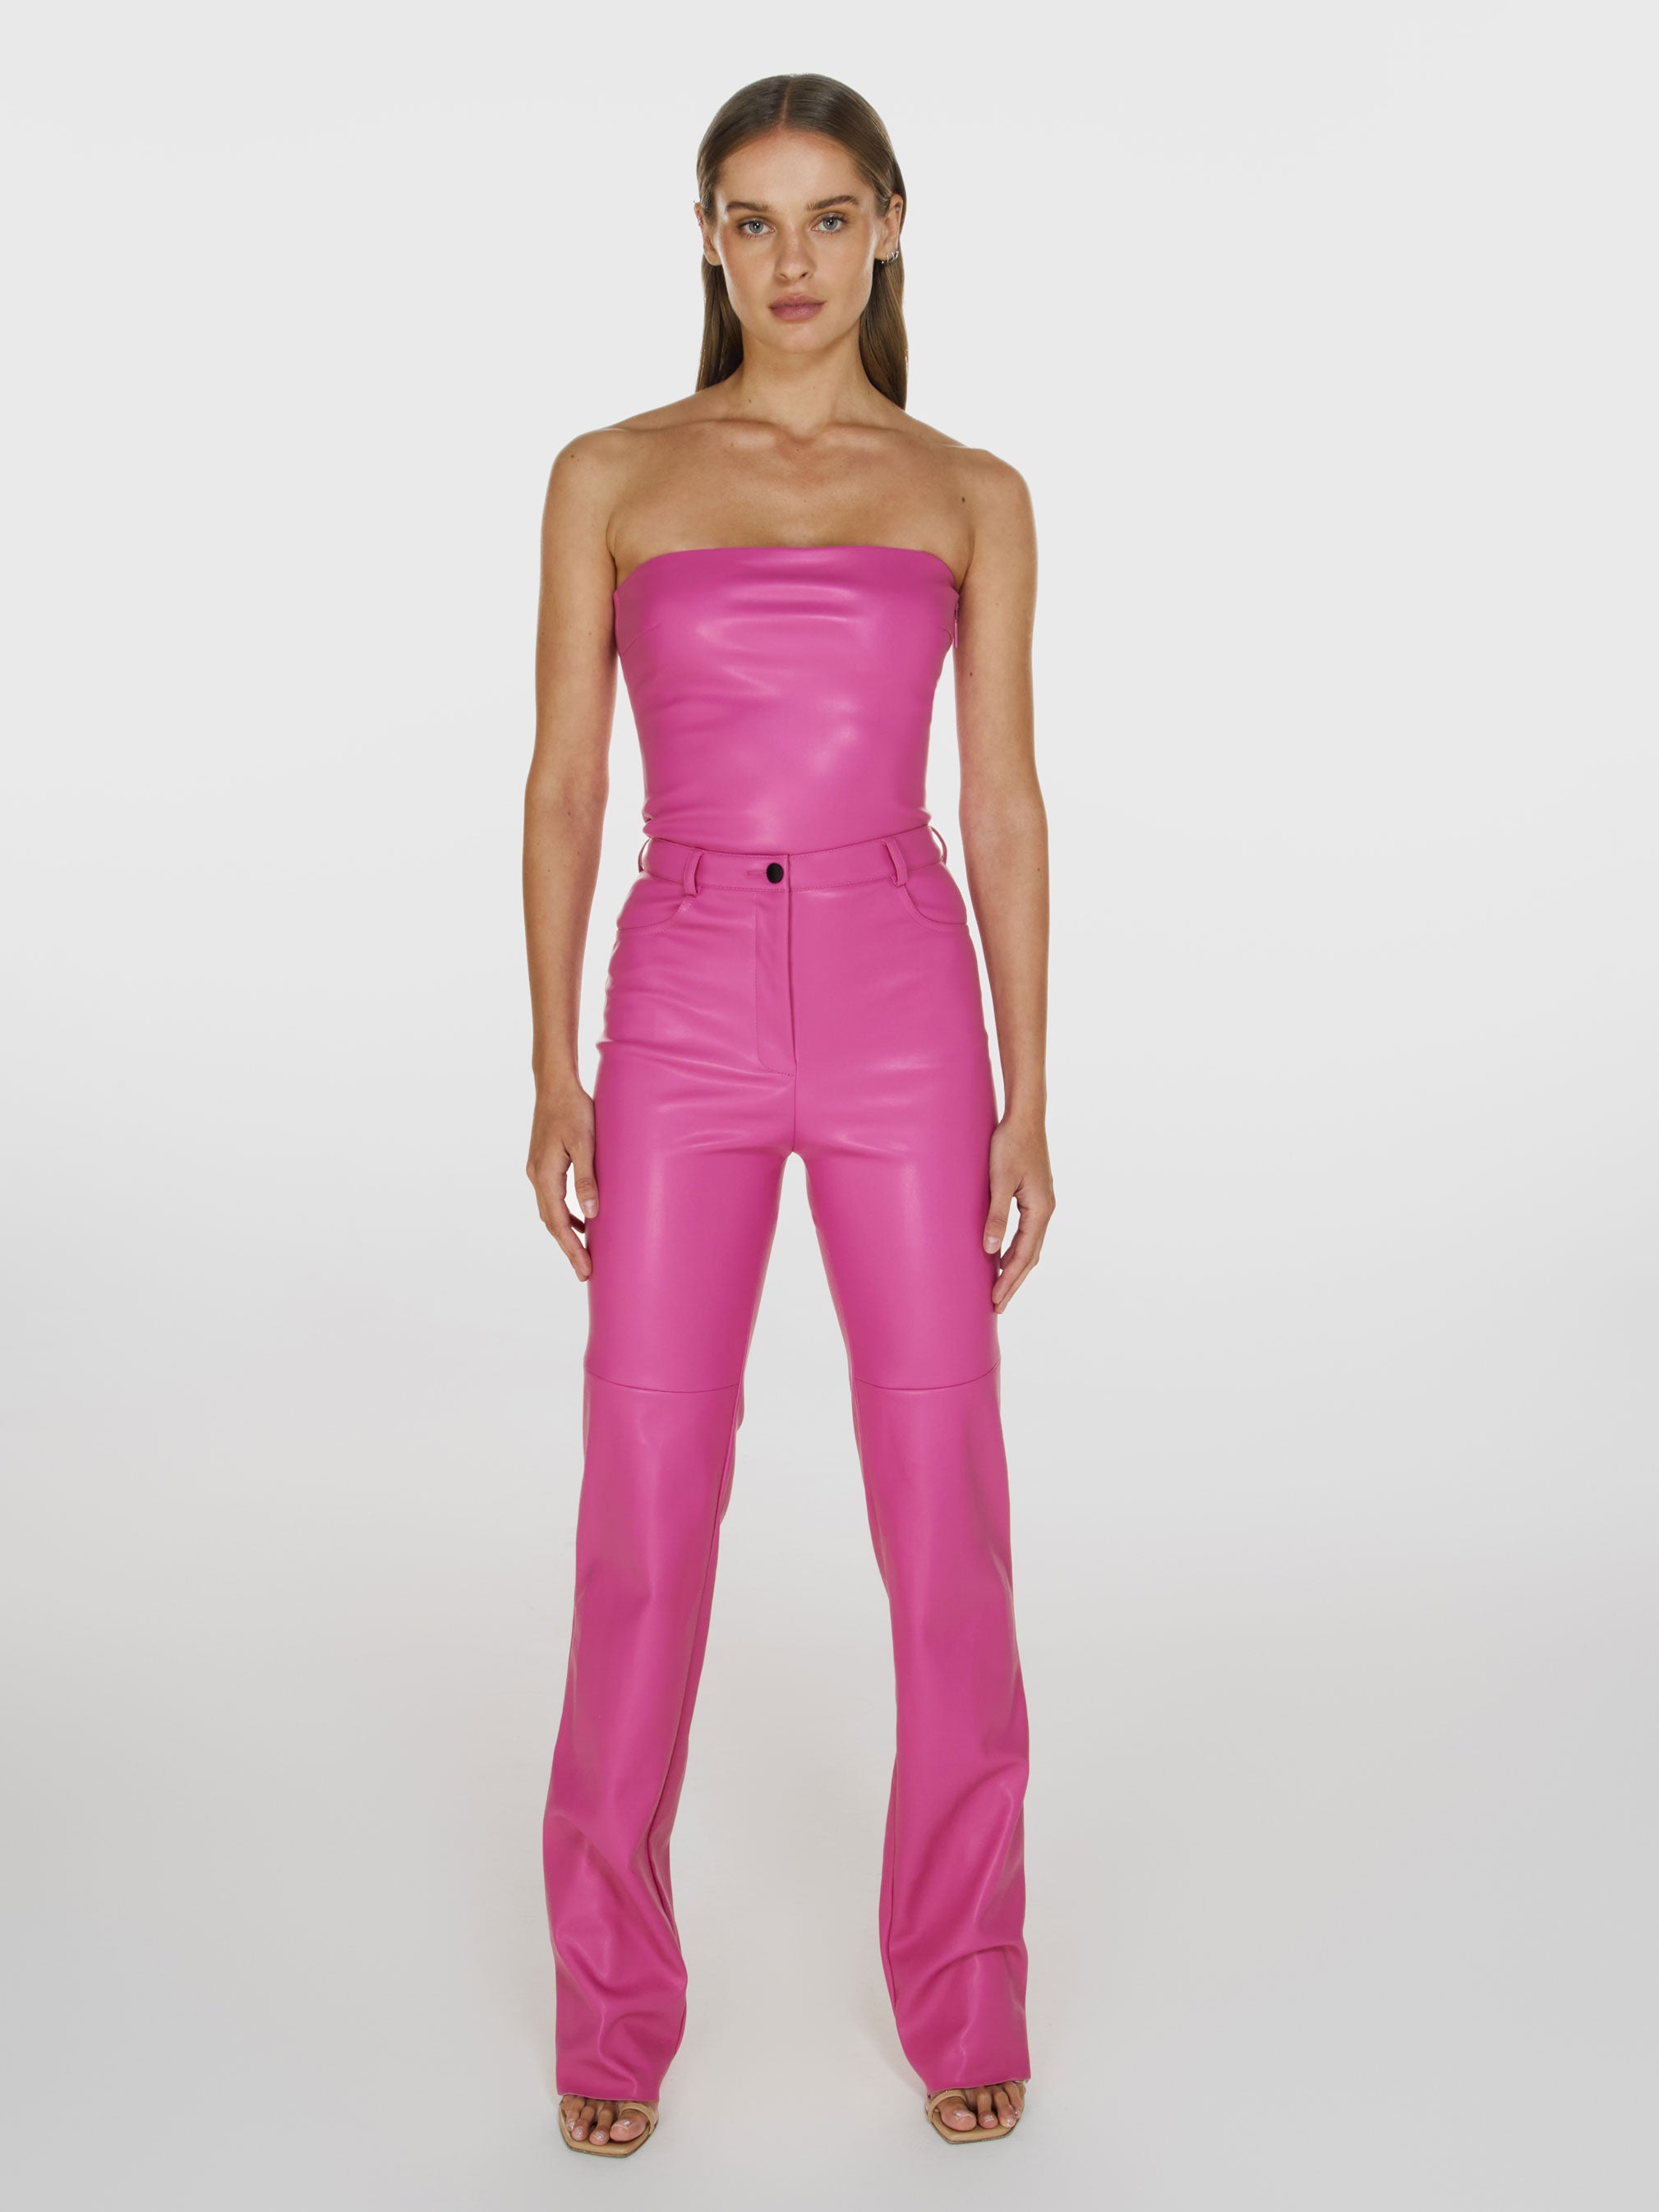 Full shot of a girl in a pink vegan leather tube top and pink vegan leather pants with straight leg